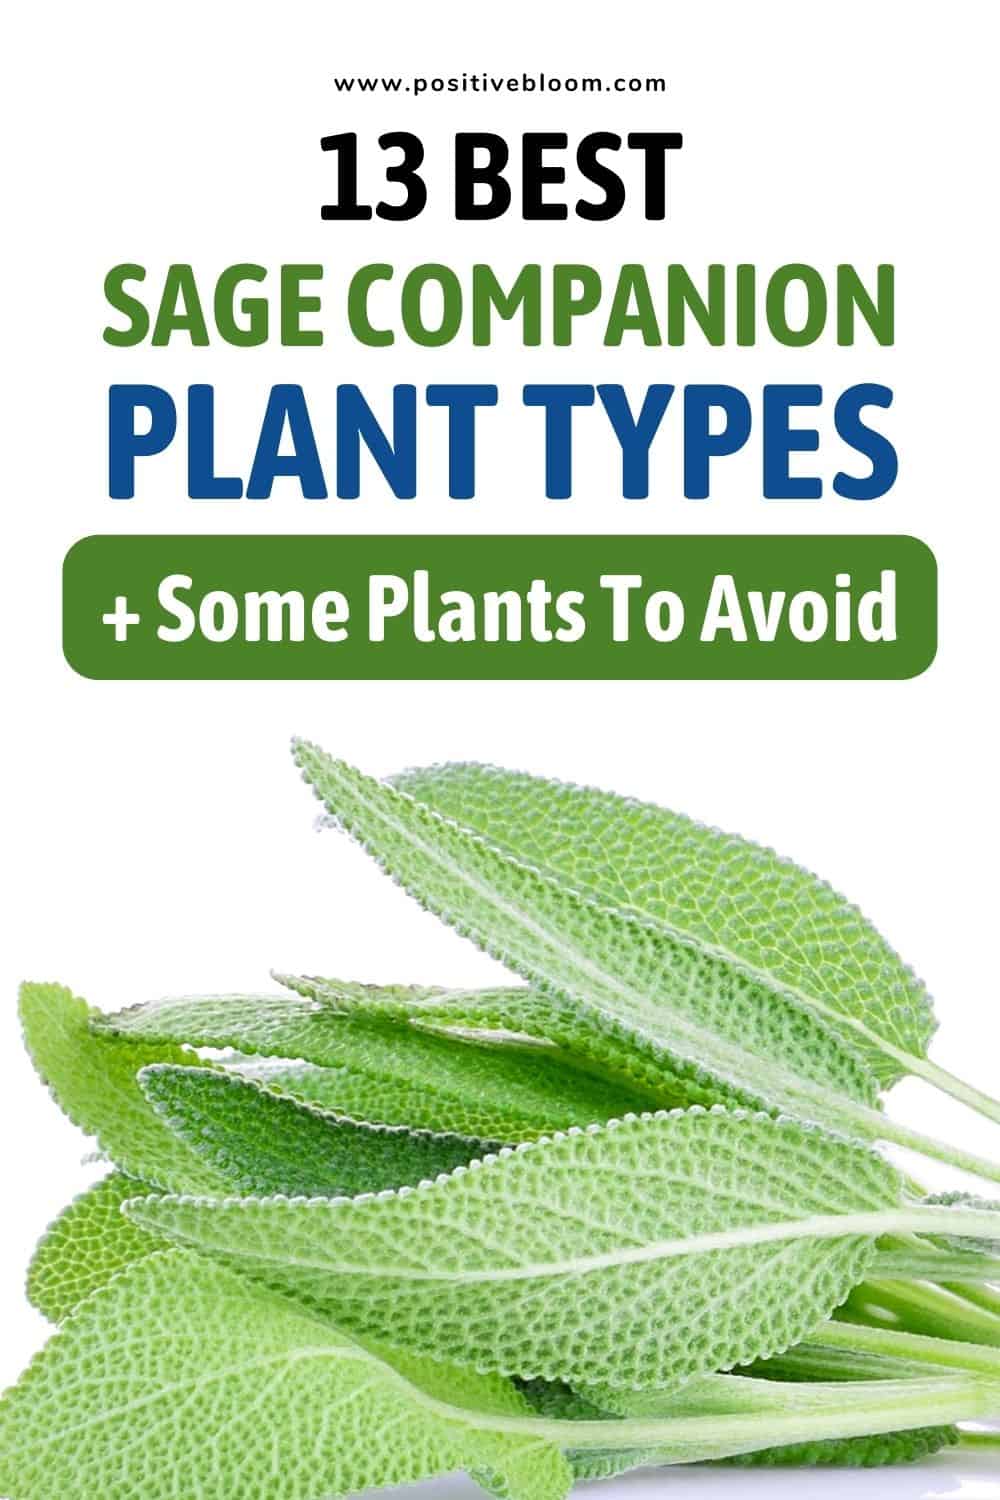 13 Best Sage Companion Plant Types + Some Plants To Avoid Pinterest